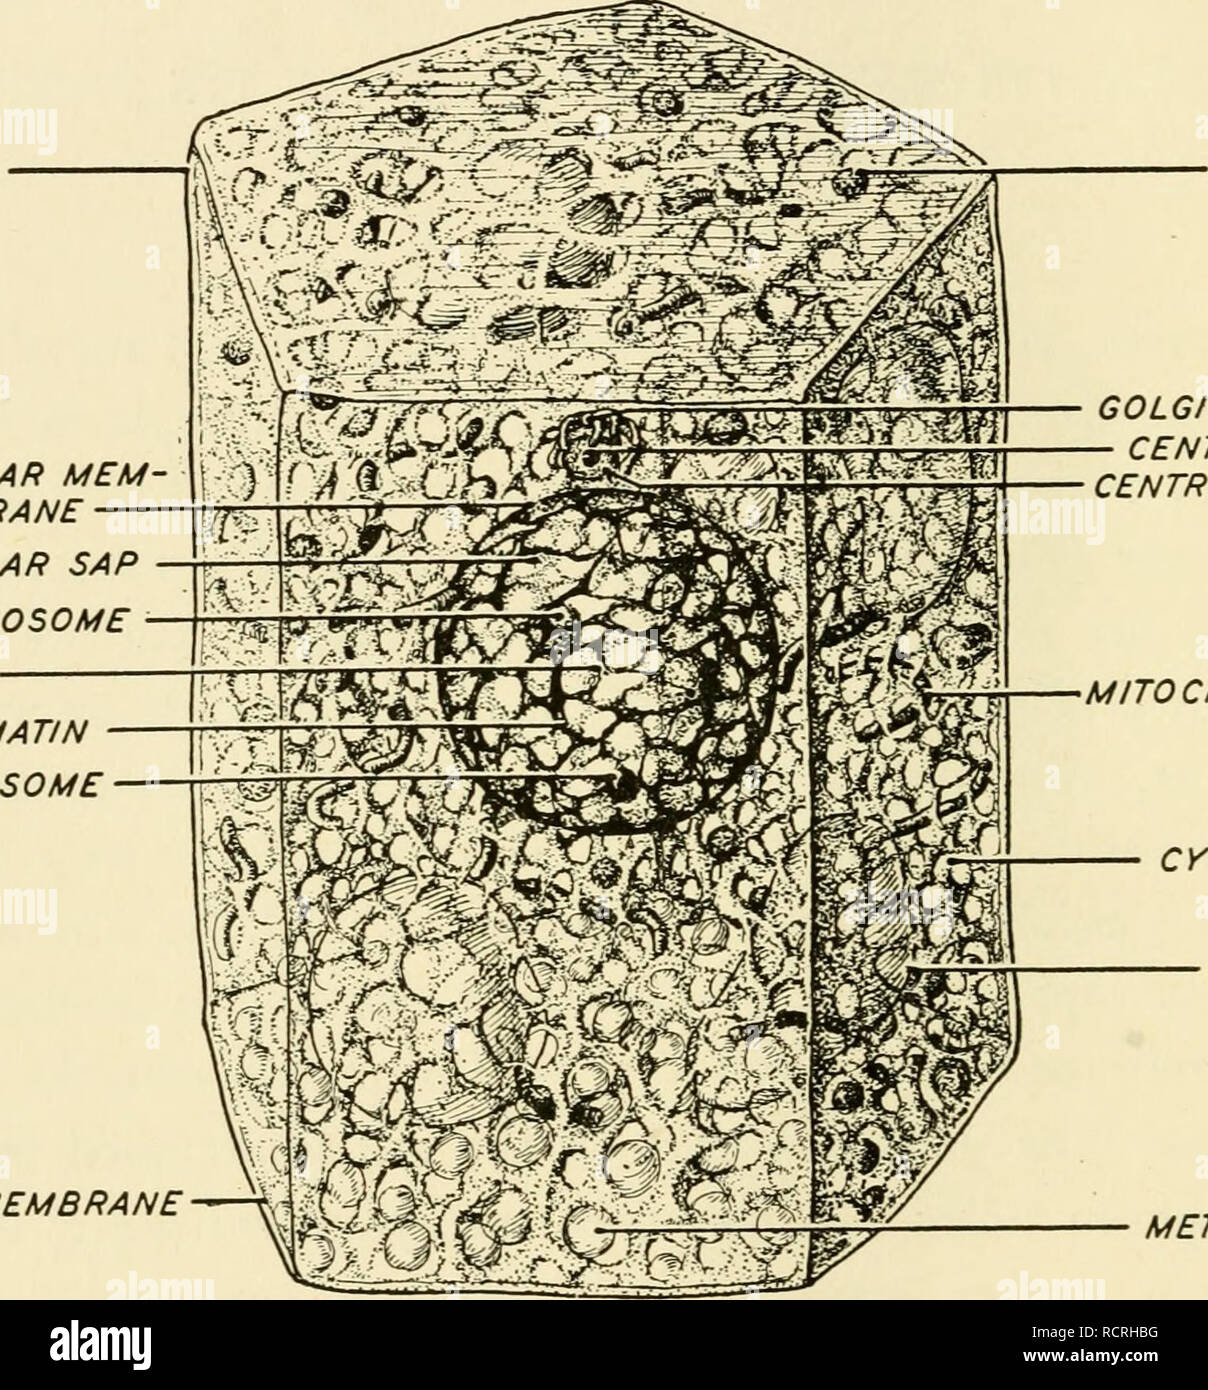 . Elements of biology, with special reference to their rôle in the lives of animals. Biology; Zoology. 30 ELEMENTS OF BIOLOGY type of protoplasm, although it is continuous with the underlying substance. This boundary, known as the plasma membrane, may be, and in many cases is, surrounded by a non-living pellicle or cell WALL, formed by substances constructed by the chemical processes within the cell. CELL WALL N U C u s CHROMATIN KARYOSOME PLASMA MEMBRANE. NUCLEAR MEM BRANE NUCLEAR SAP PLASMOSOME LININ PLASTID GOLGI BODIES CENTROSOME CENTROSPHERE MITOCHONDRIA CYTOPLASM VACUOLE METAPLASM' Fig.  Stock Photo